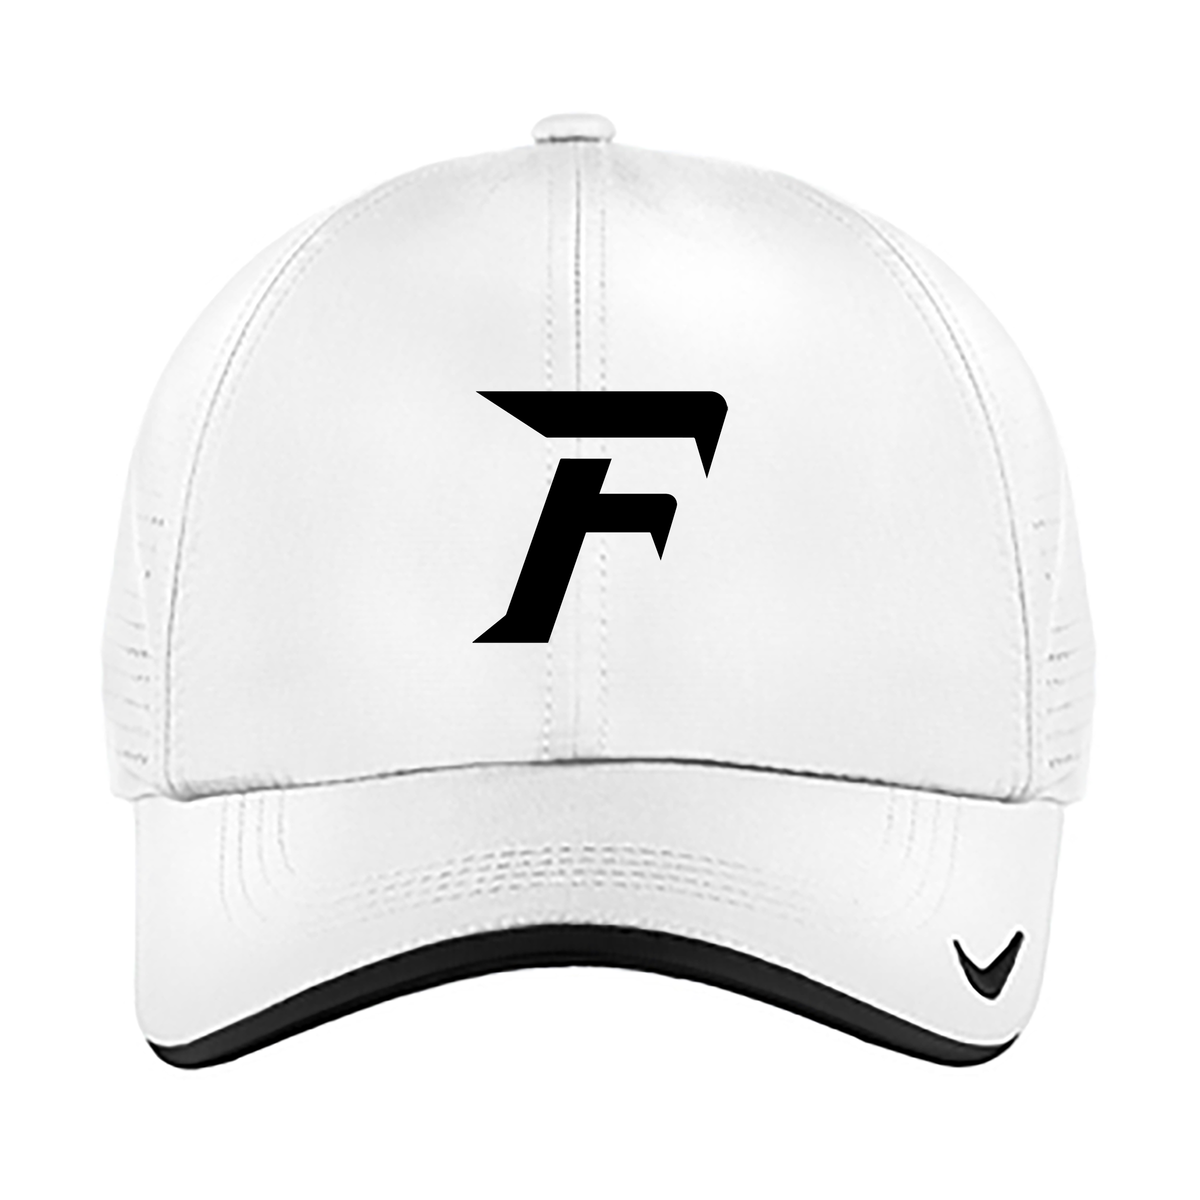 Foothill Falcons Nike Dri-FIT Perforated Performance Cap